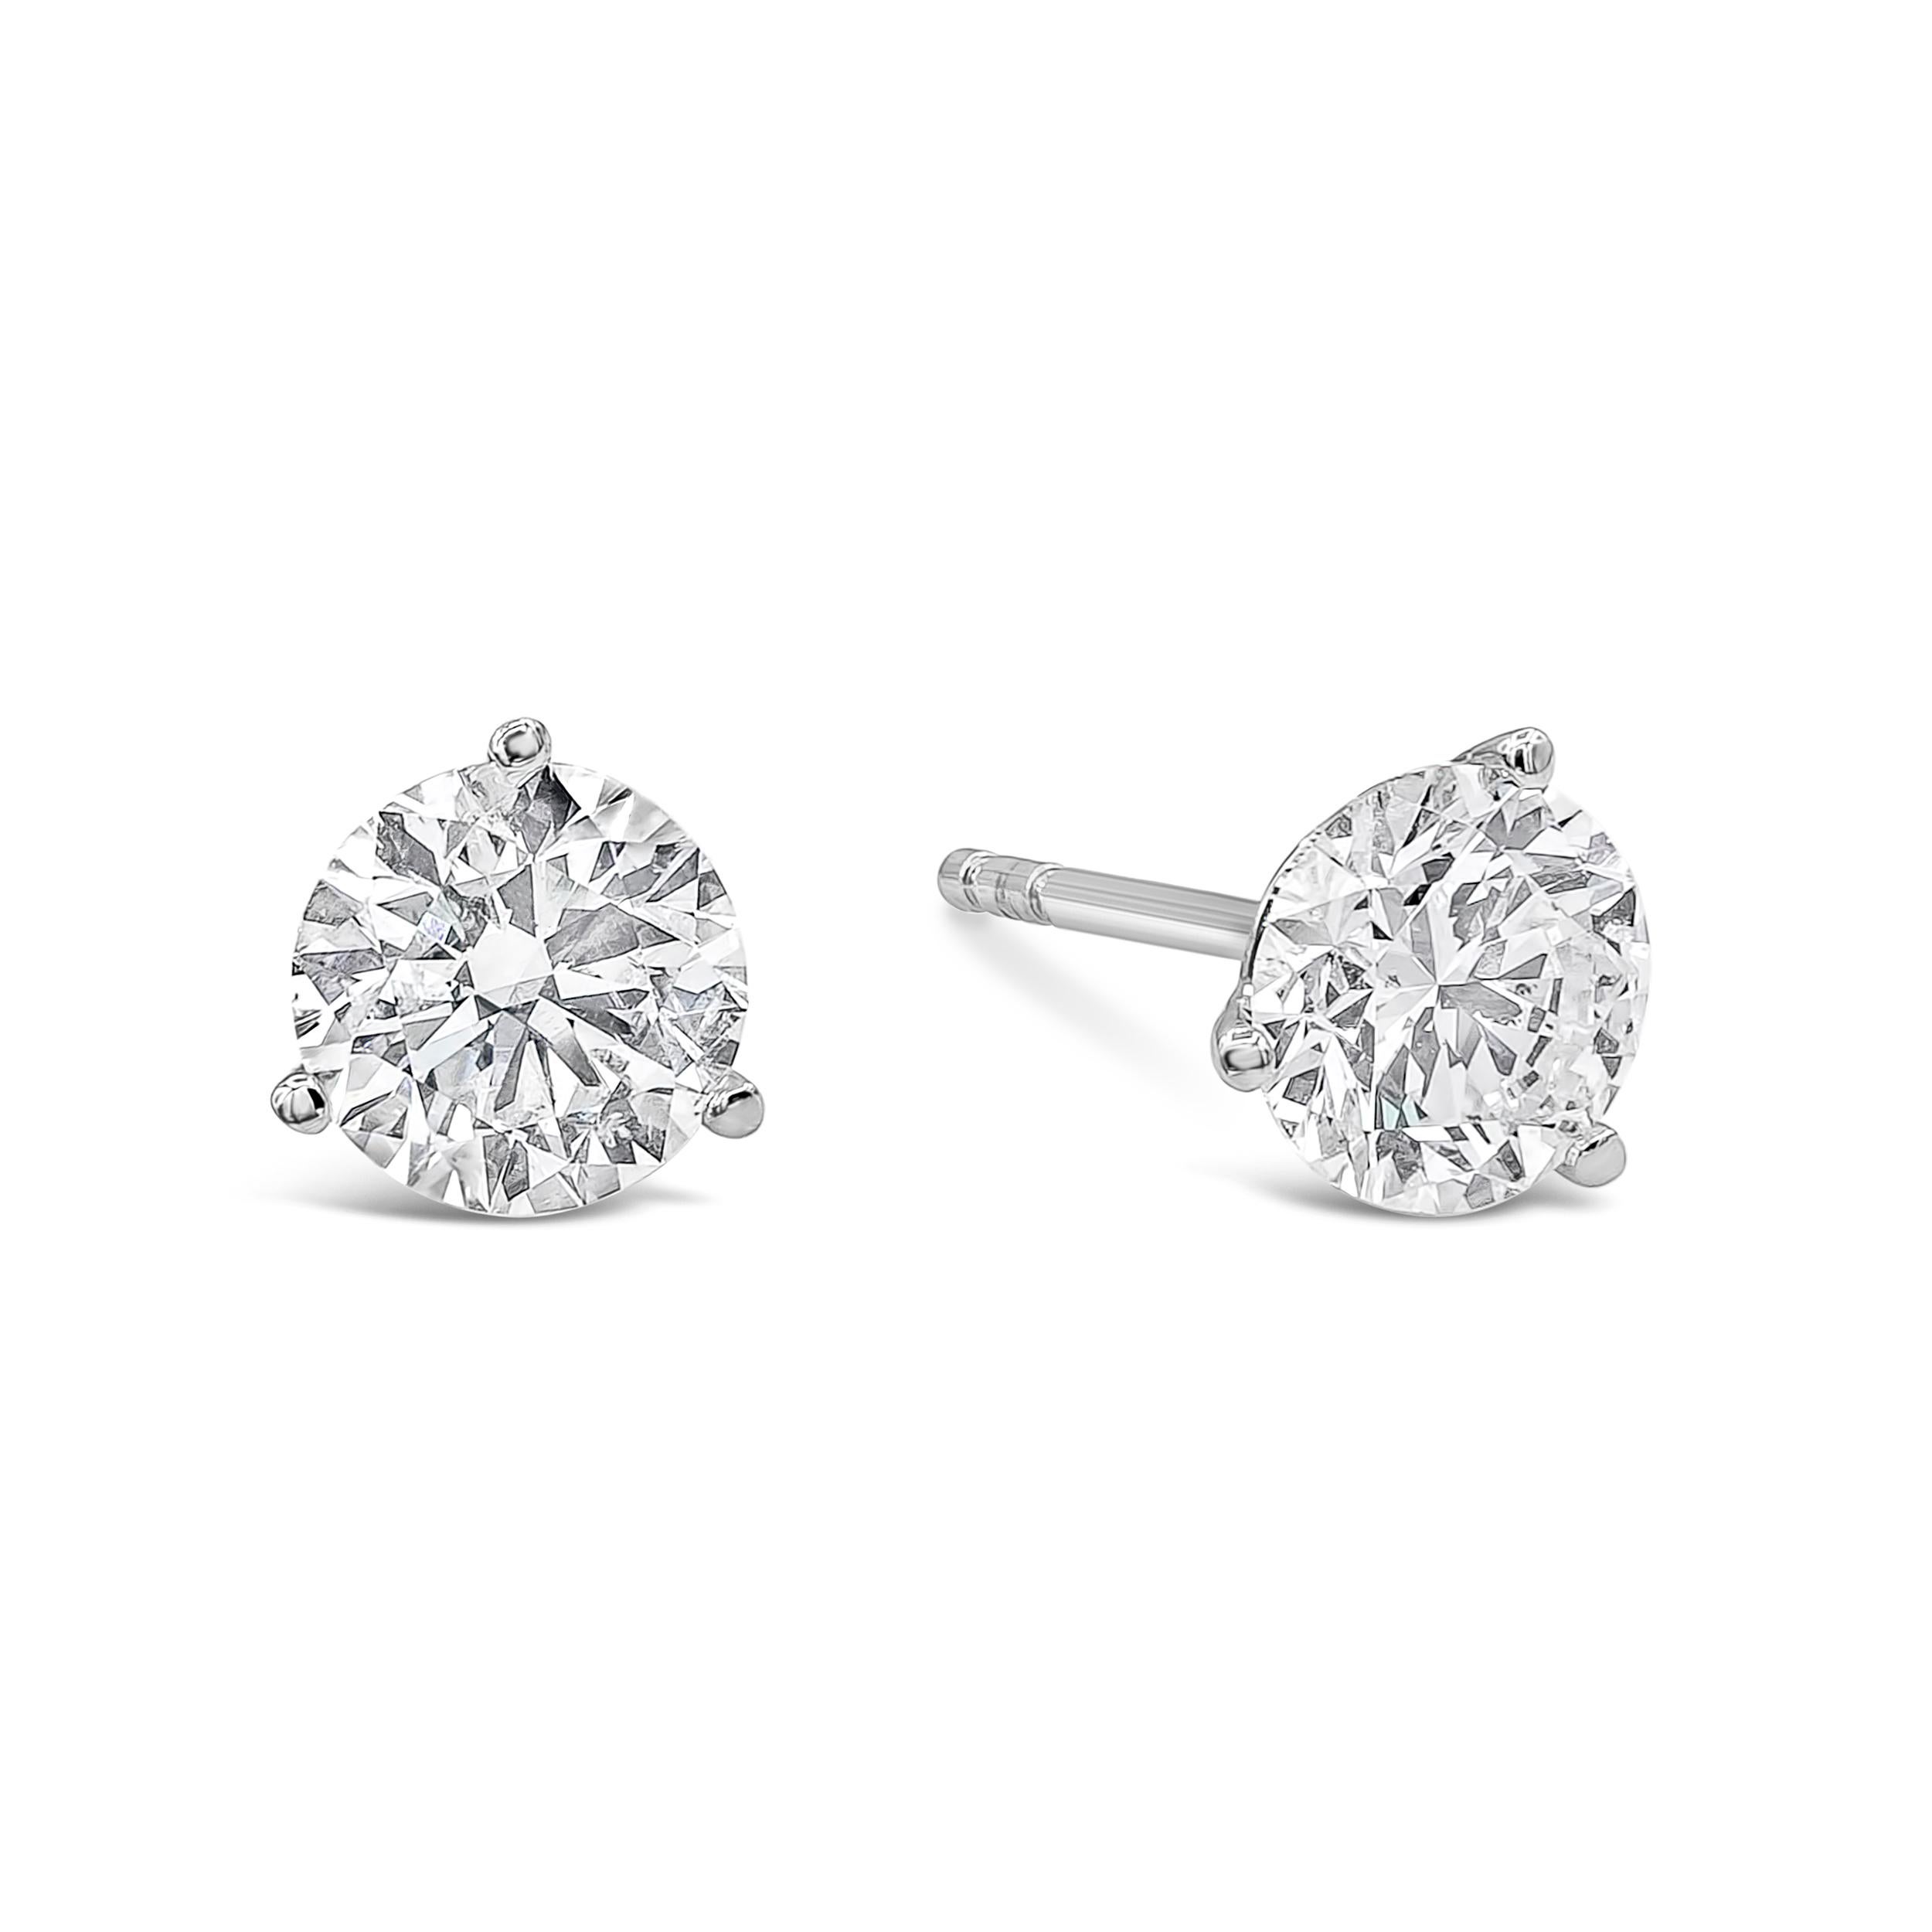 A classic martini style stud earrings showcasing two round brilliant diamonds weighing 1.52 and 1.56 carats respectively, martini set in 14 karat white gold. Diamonds are certified by IGI as G color, SI1 clarity. 

Style available in different price